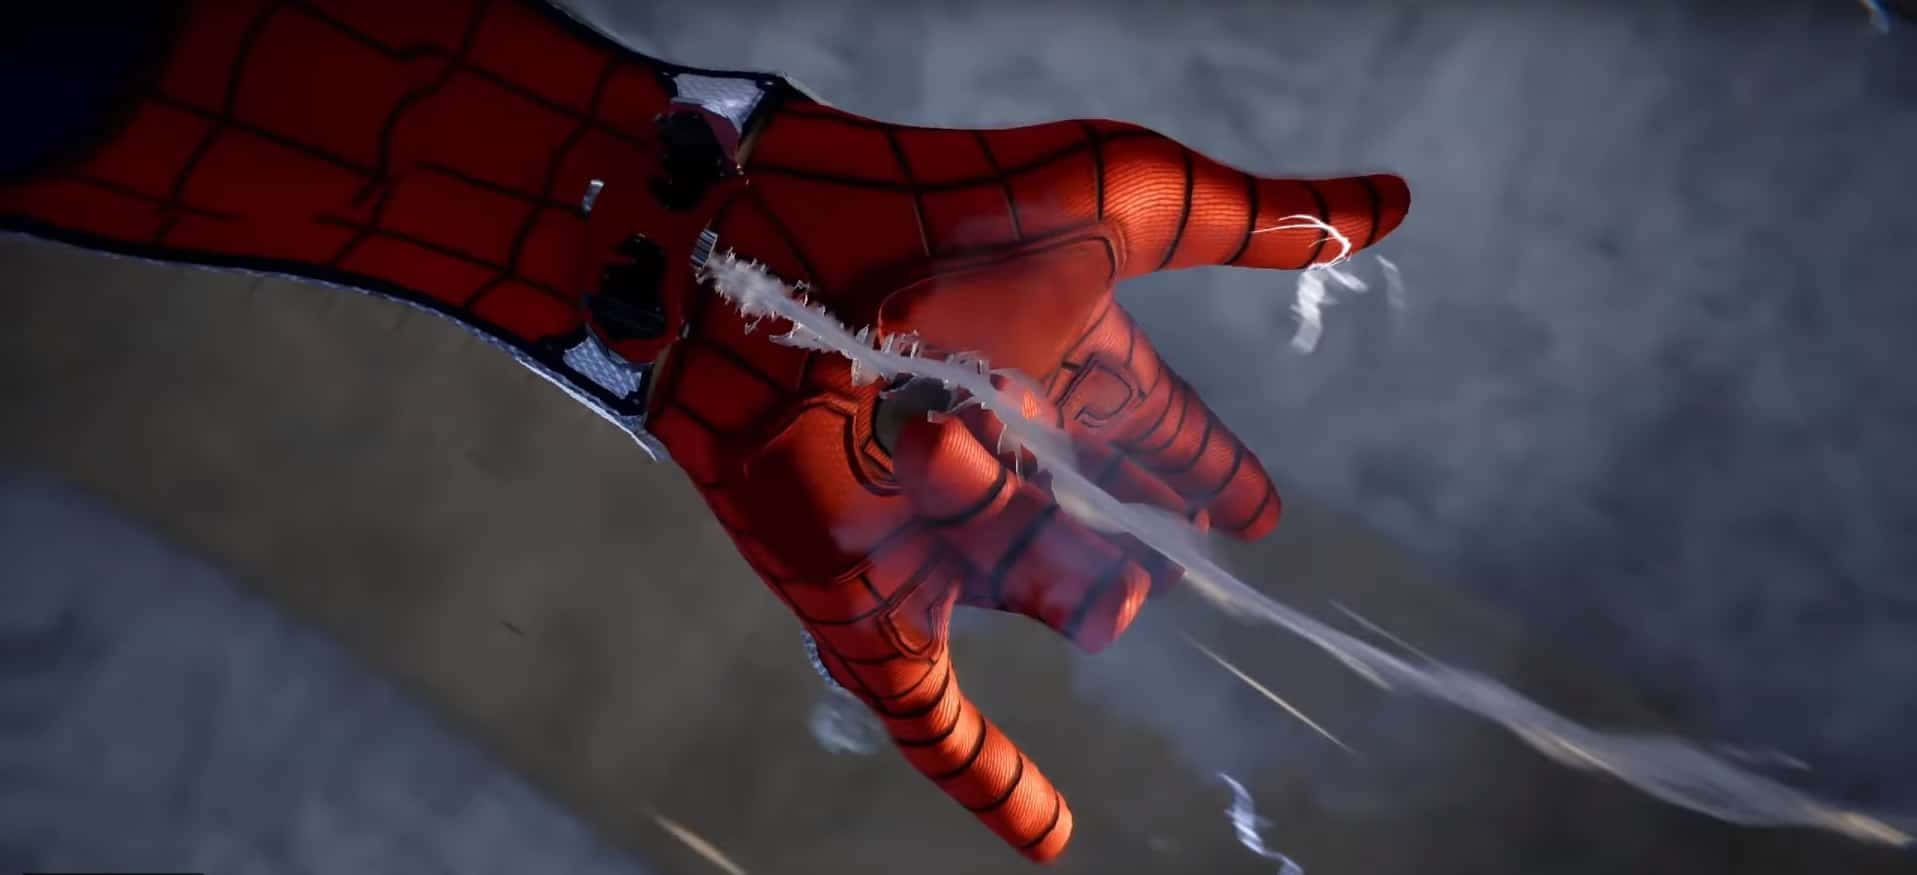 Spider-Man shooting webs with his web shooters Wallpaper